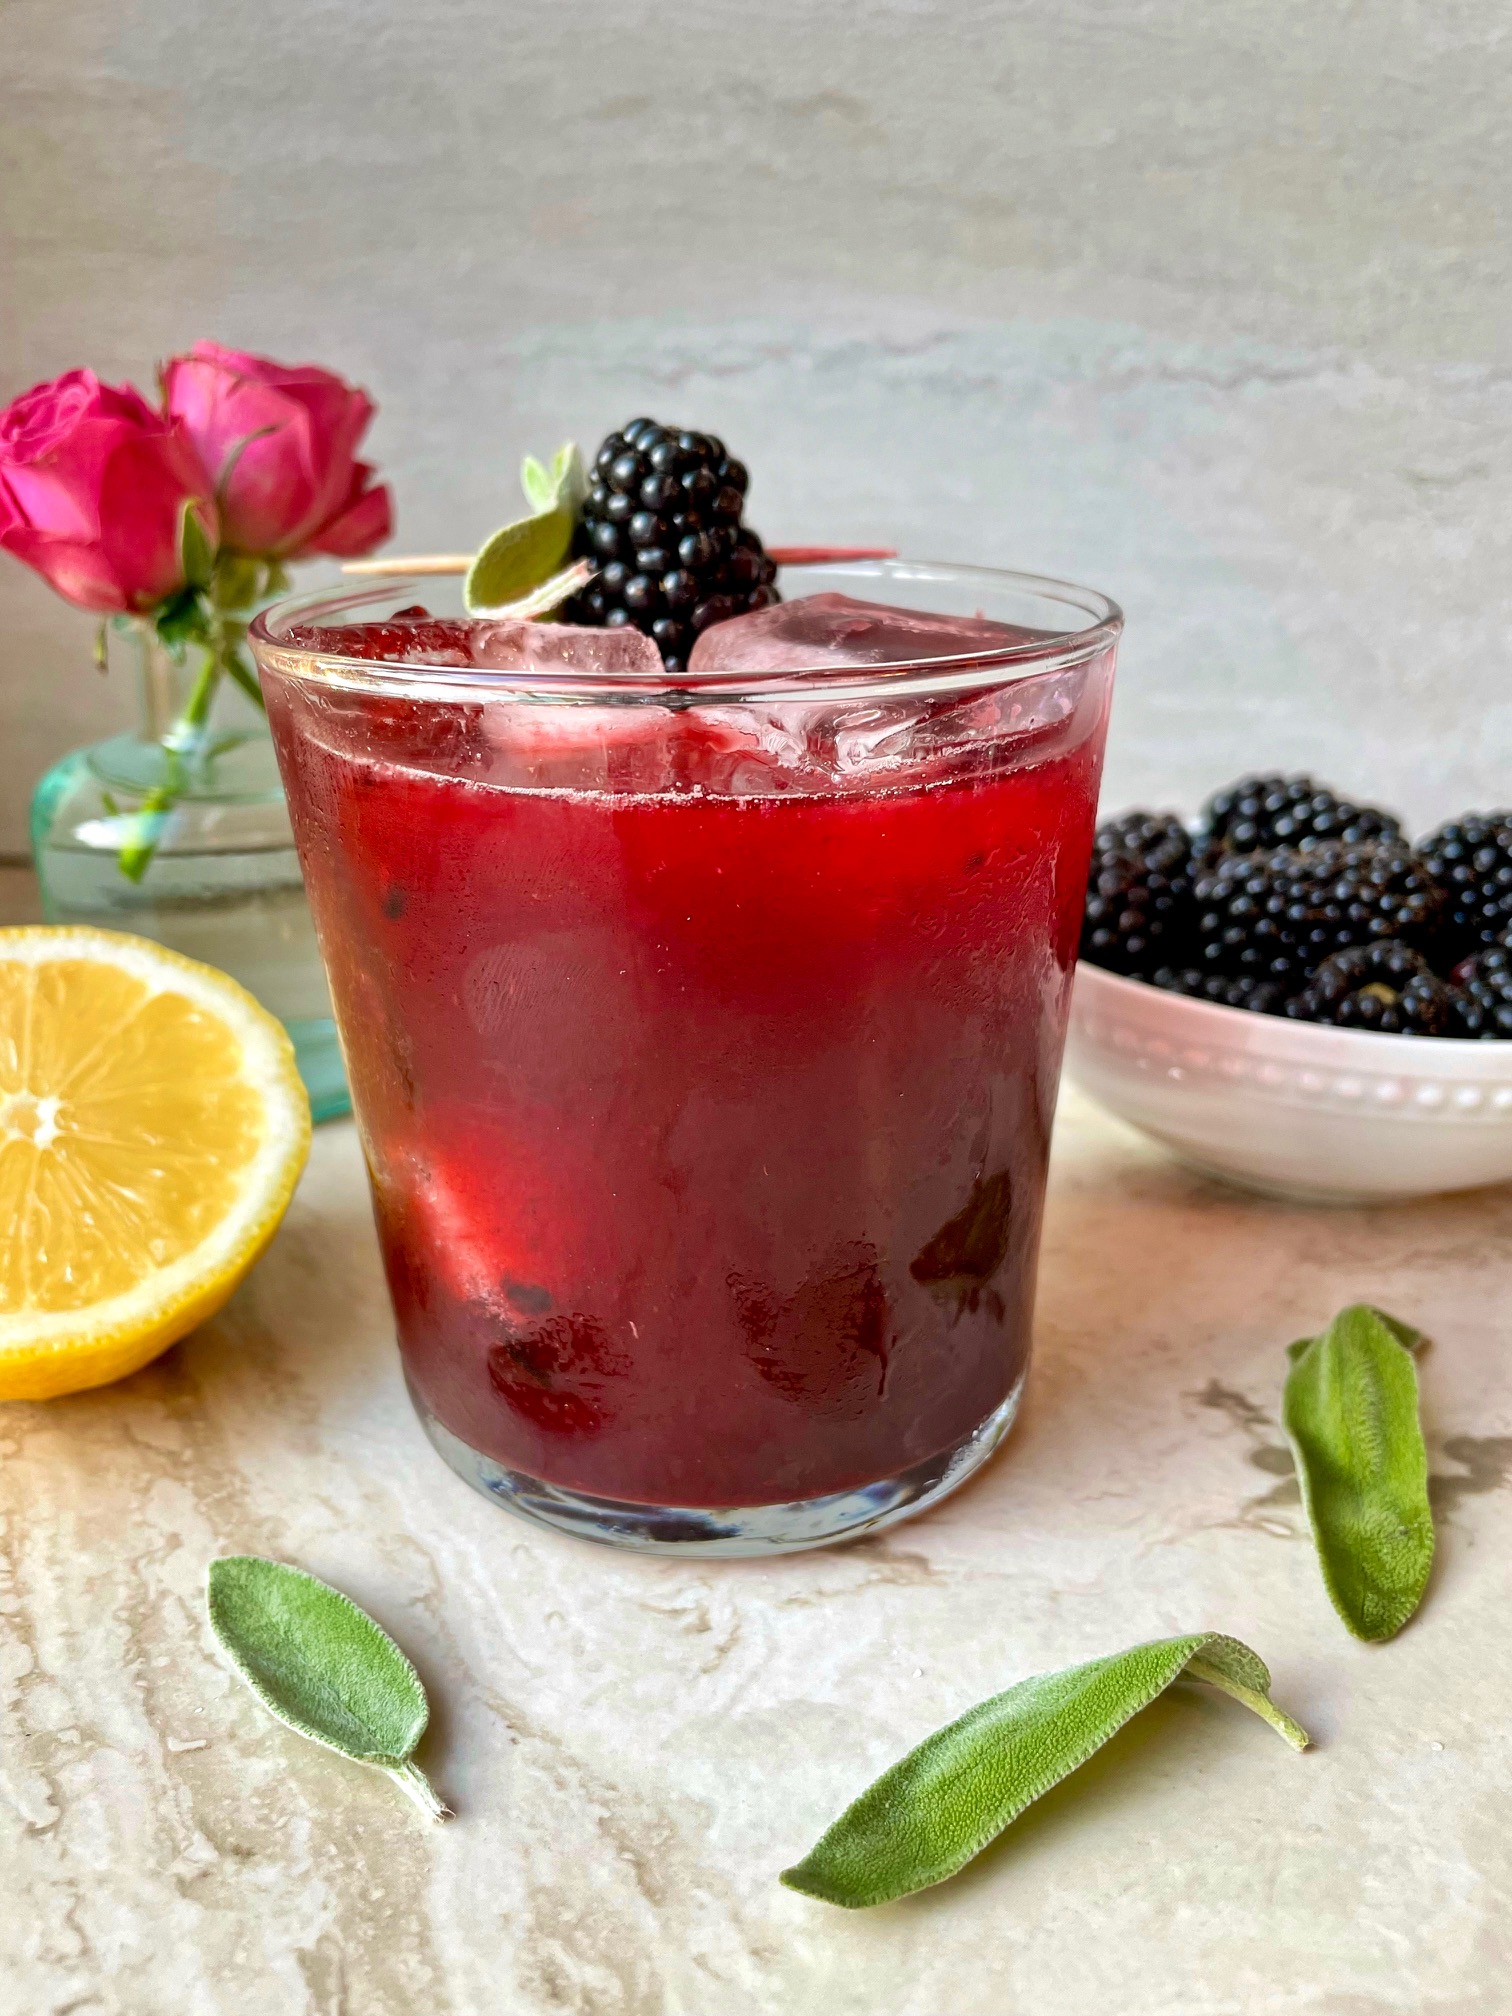 a side shot of the completed margarita with a lemon half, sage leaves, flowers and blackberries in a bowl surrounding the drink